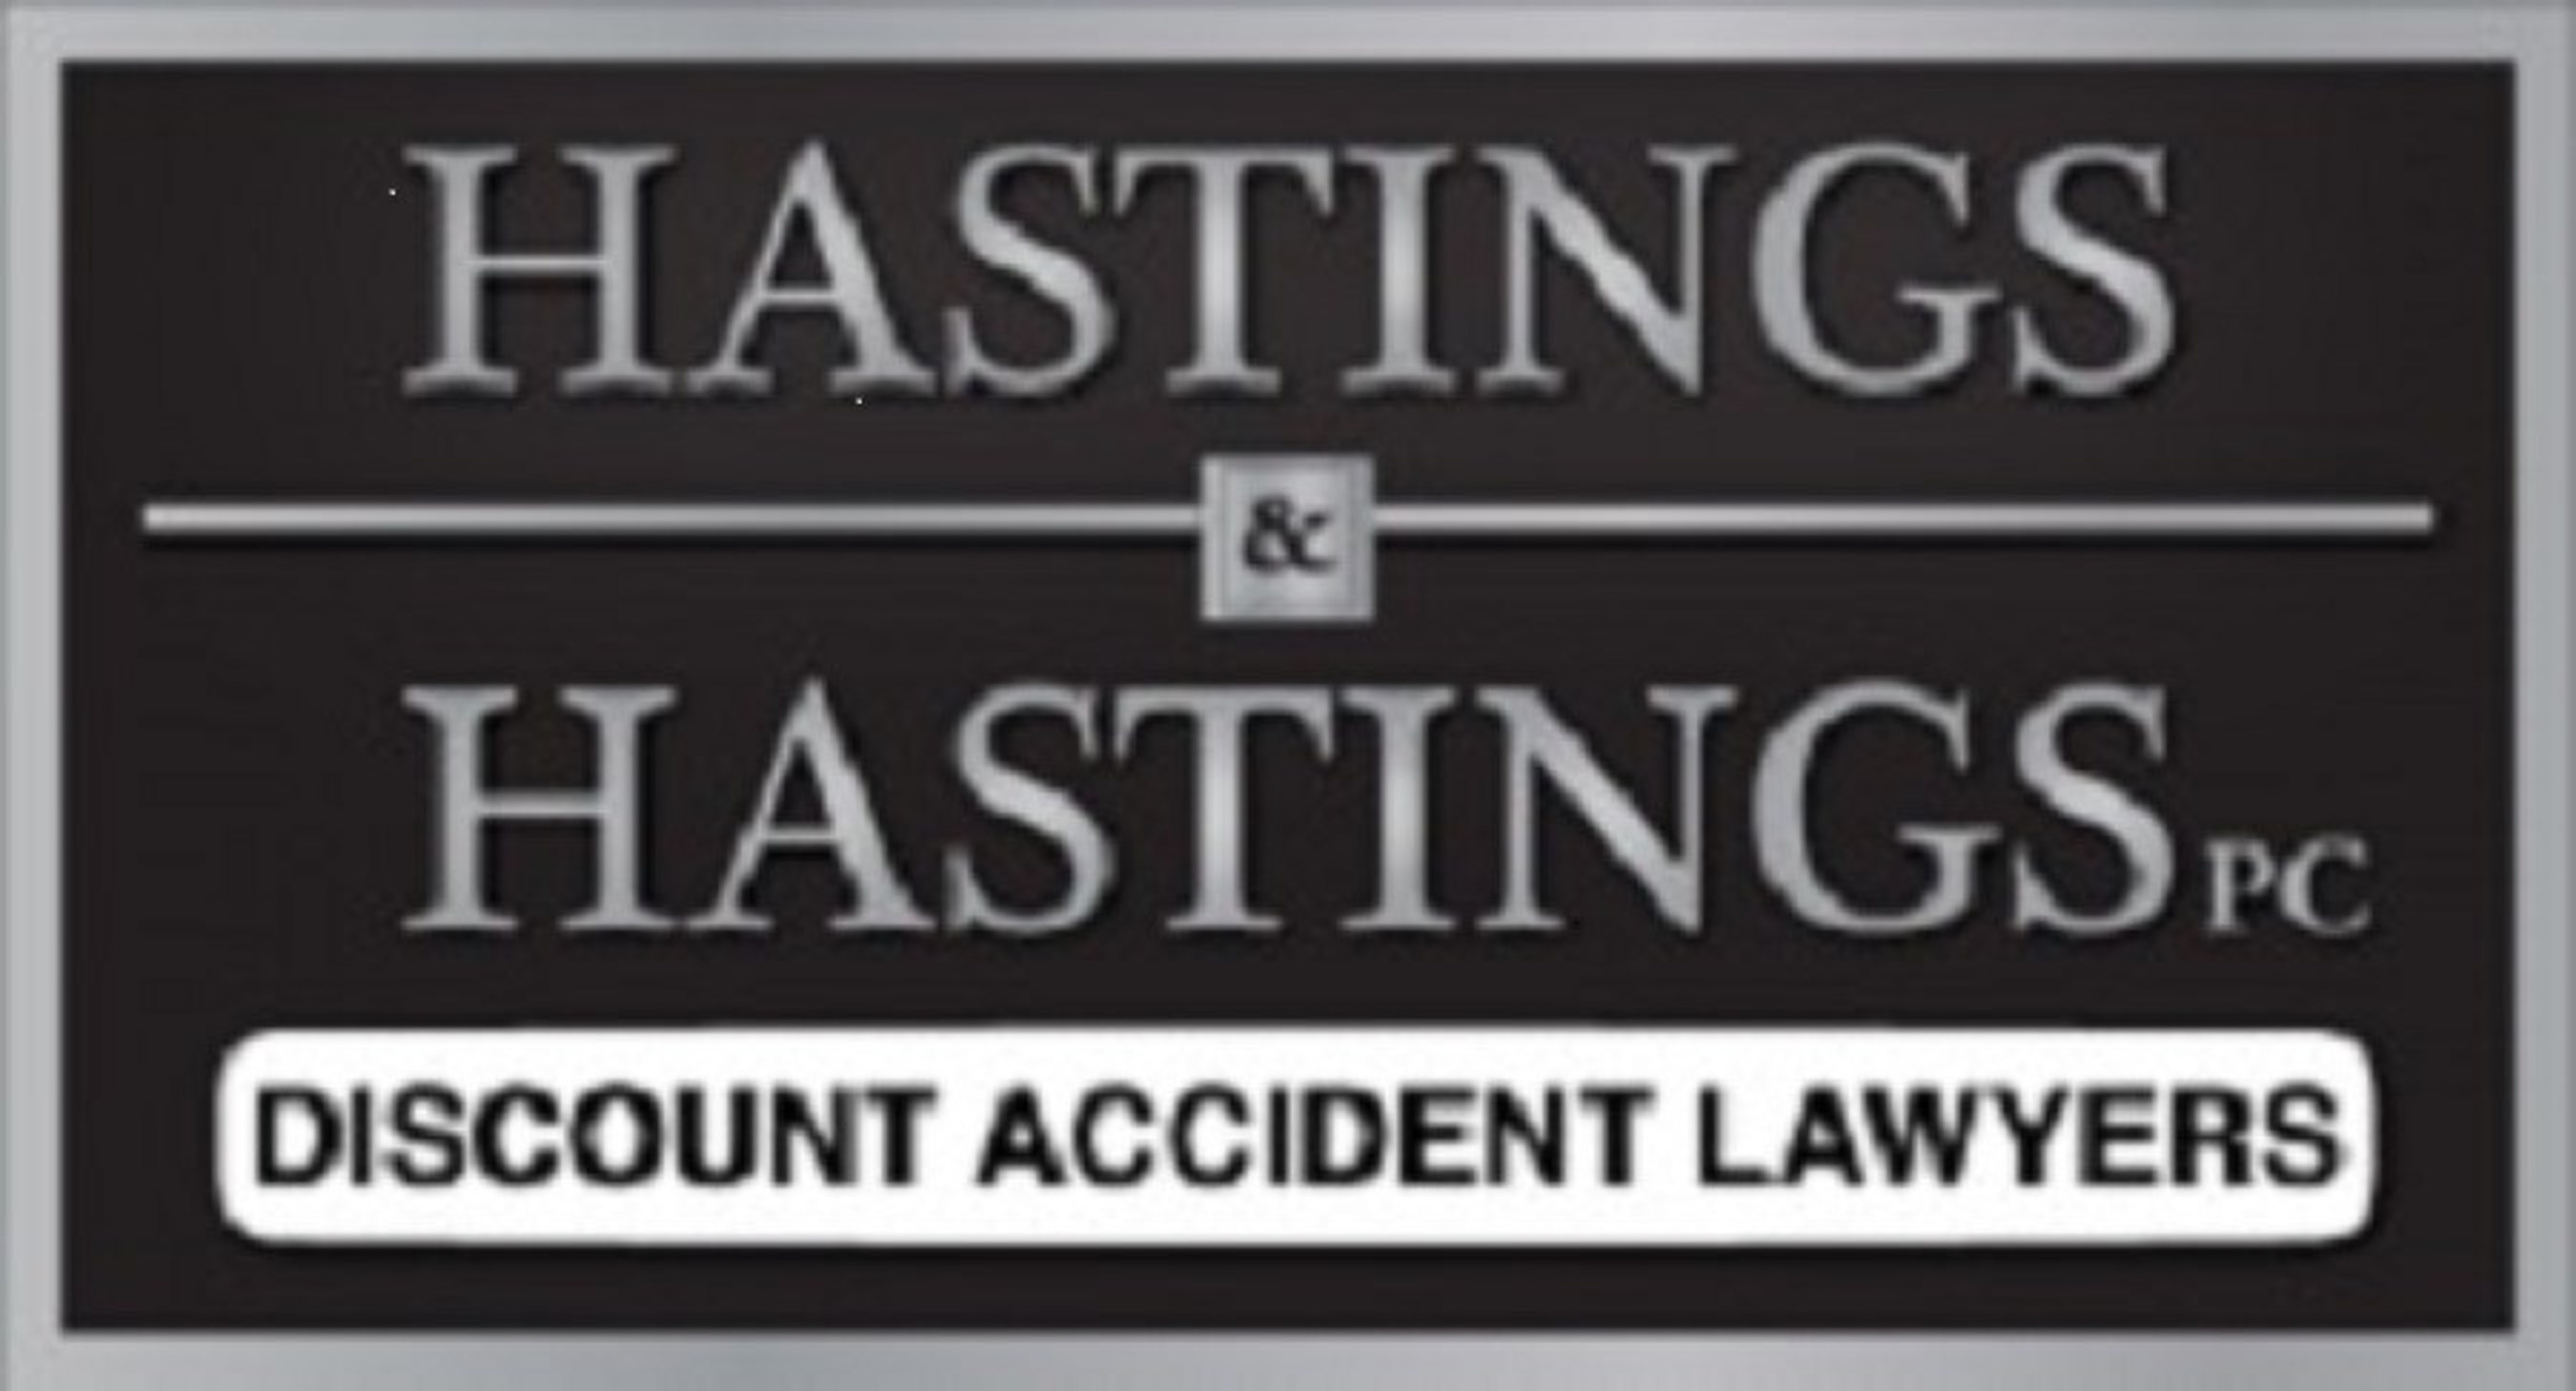 Hastings & Hastings Emphasizes Excellent Client Relationships